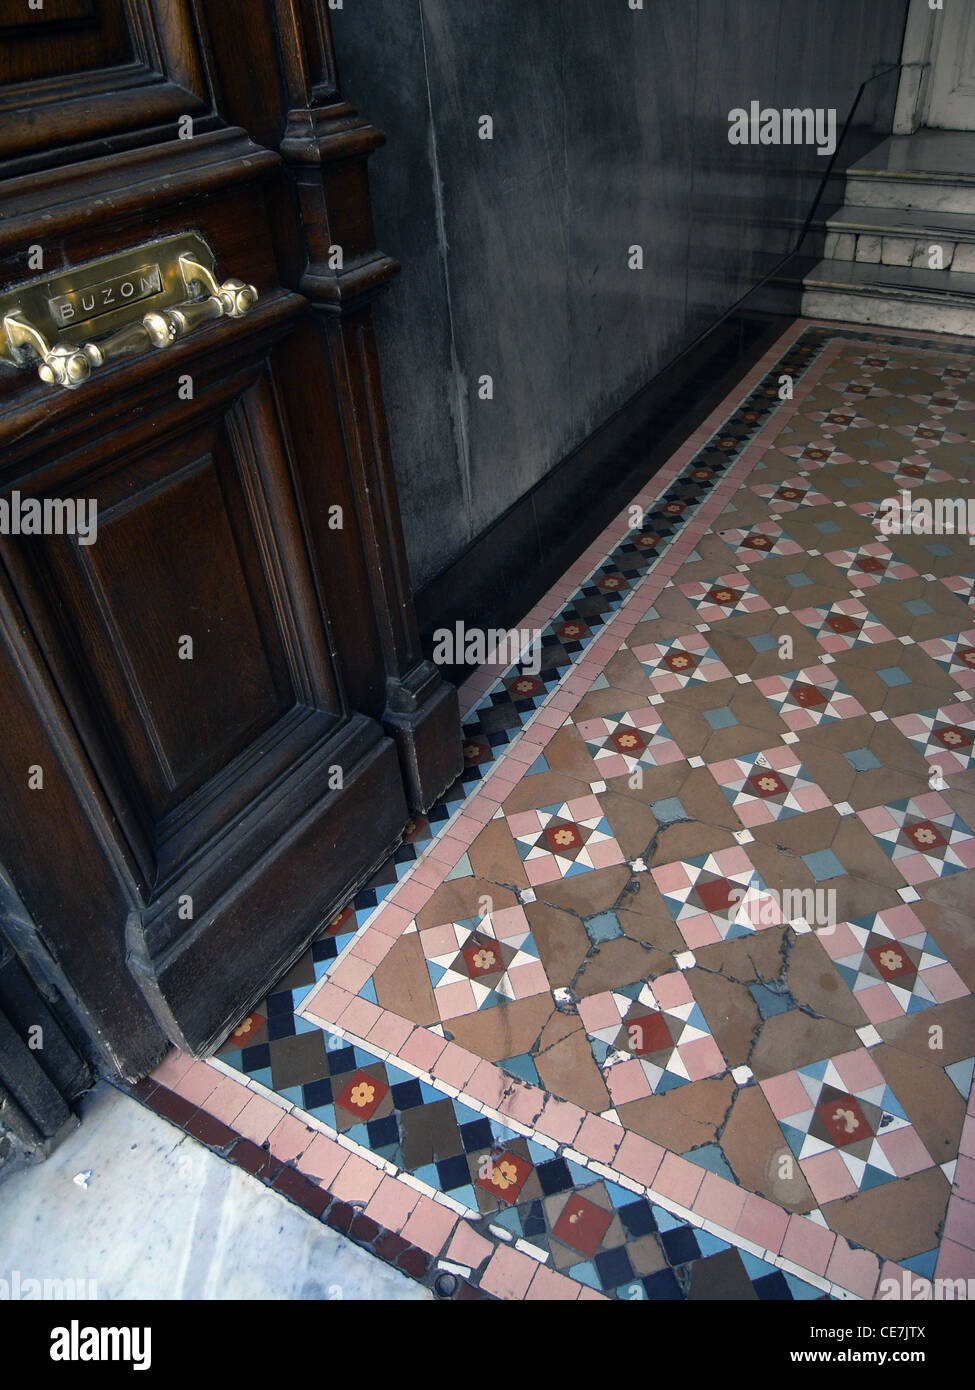 Old tiled floor and doors of building entrance, San Telmo, Buenos Aires, Argentina. No PR Stock Photo